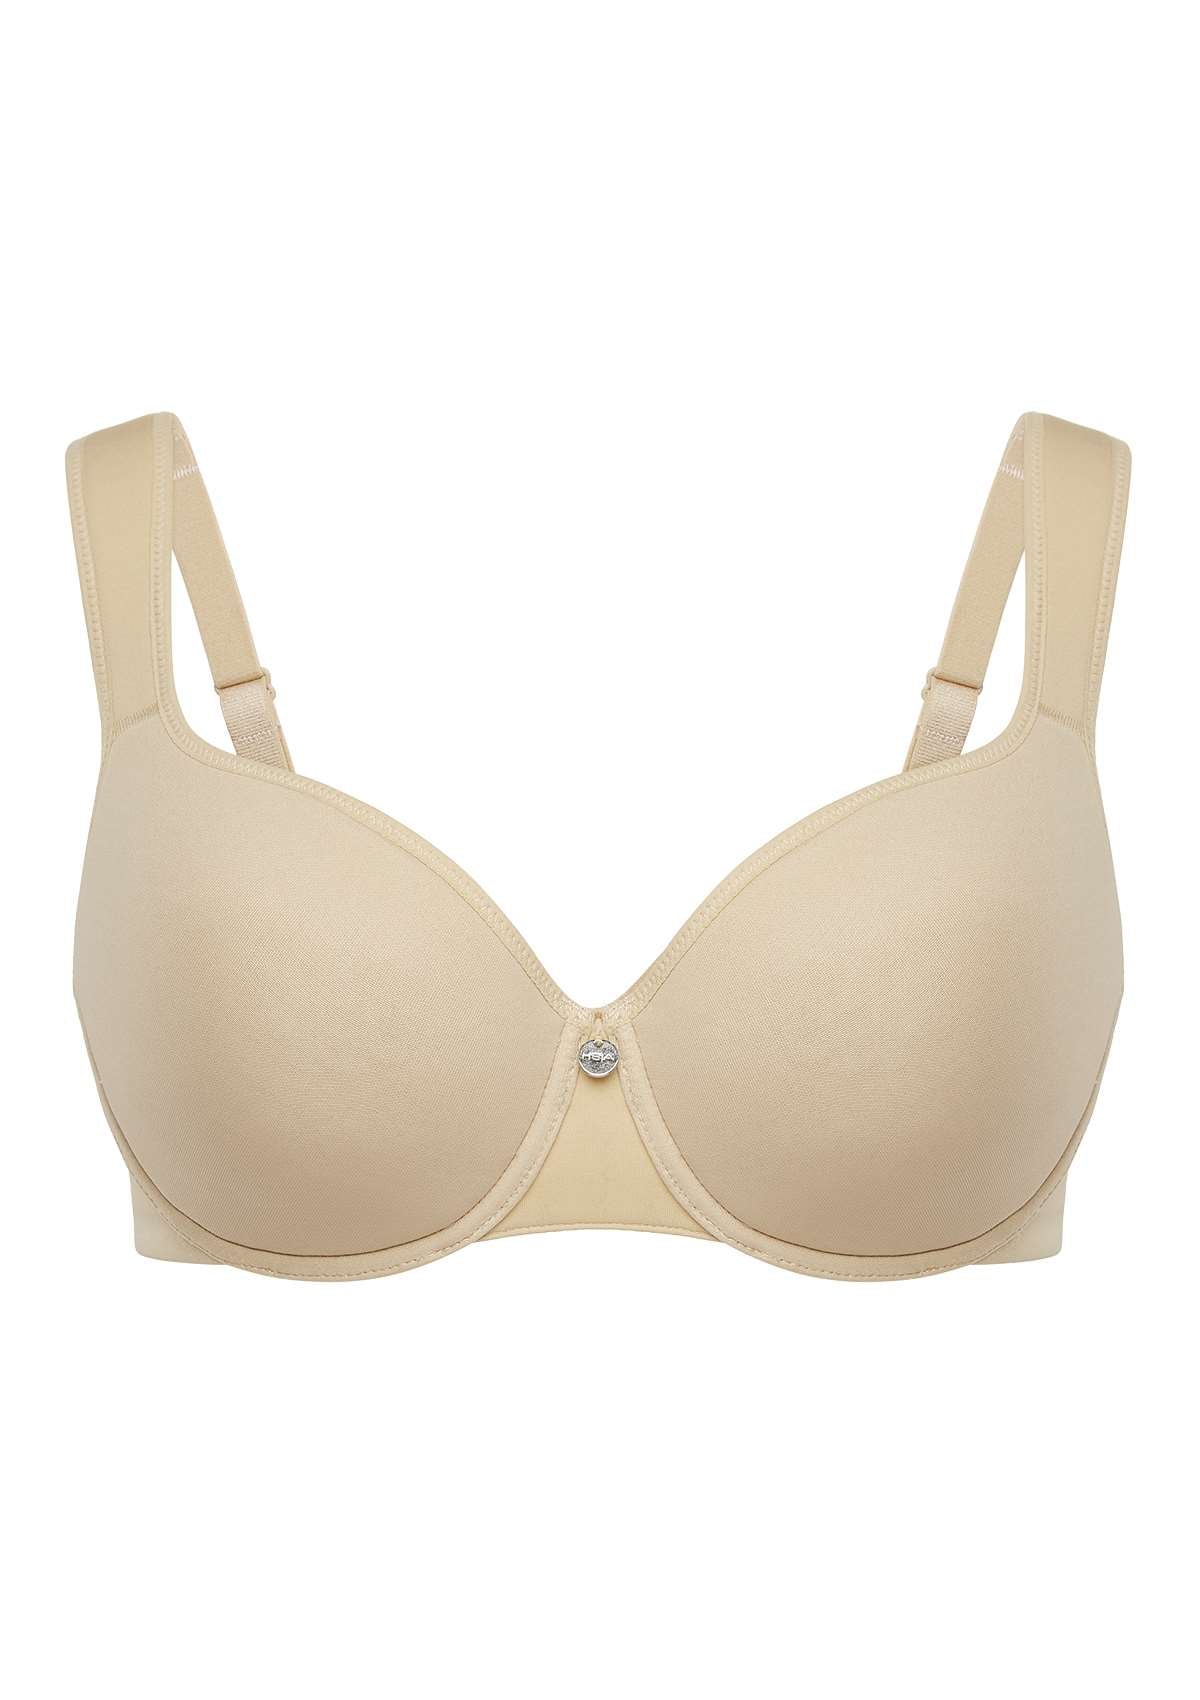 HSIA Patricia Seamless Lightly Padded Minimizer Bra -for Bigger Busts - Beige / 40 / I